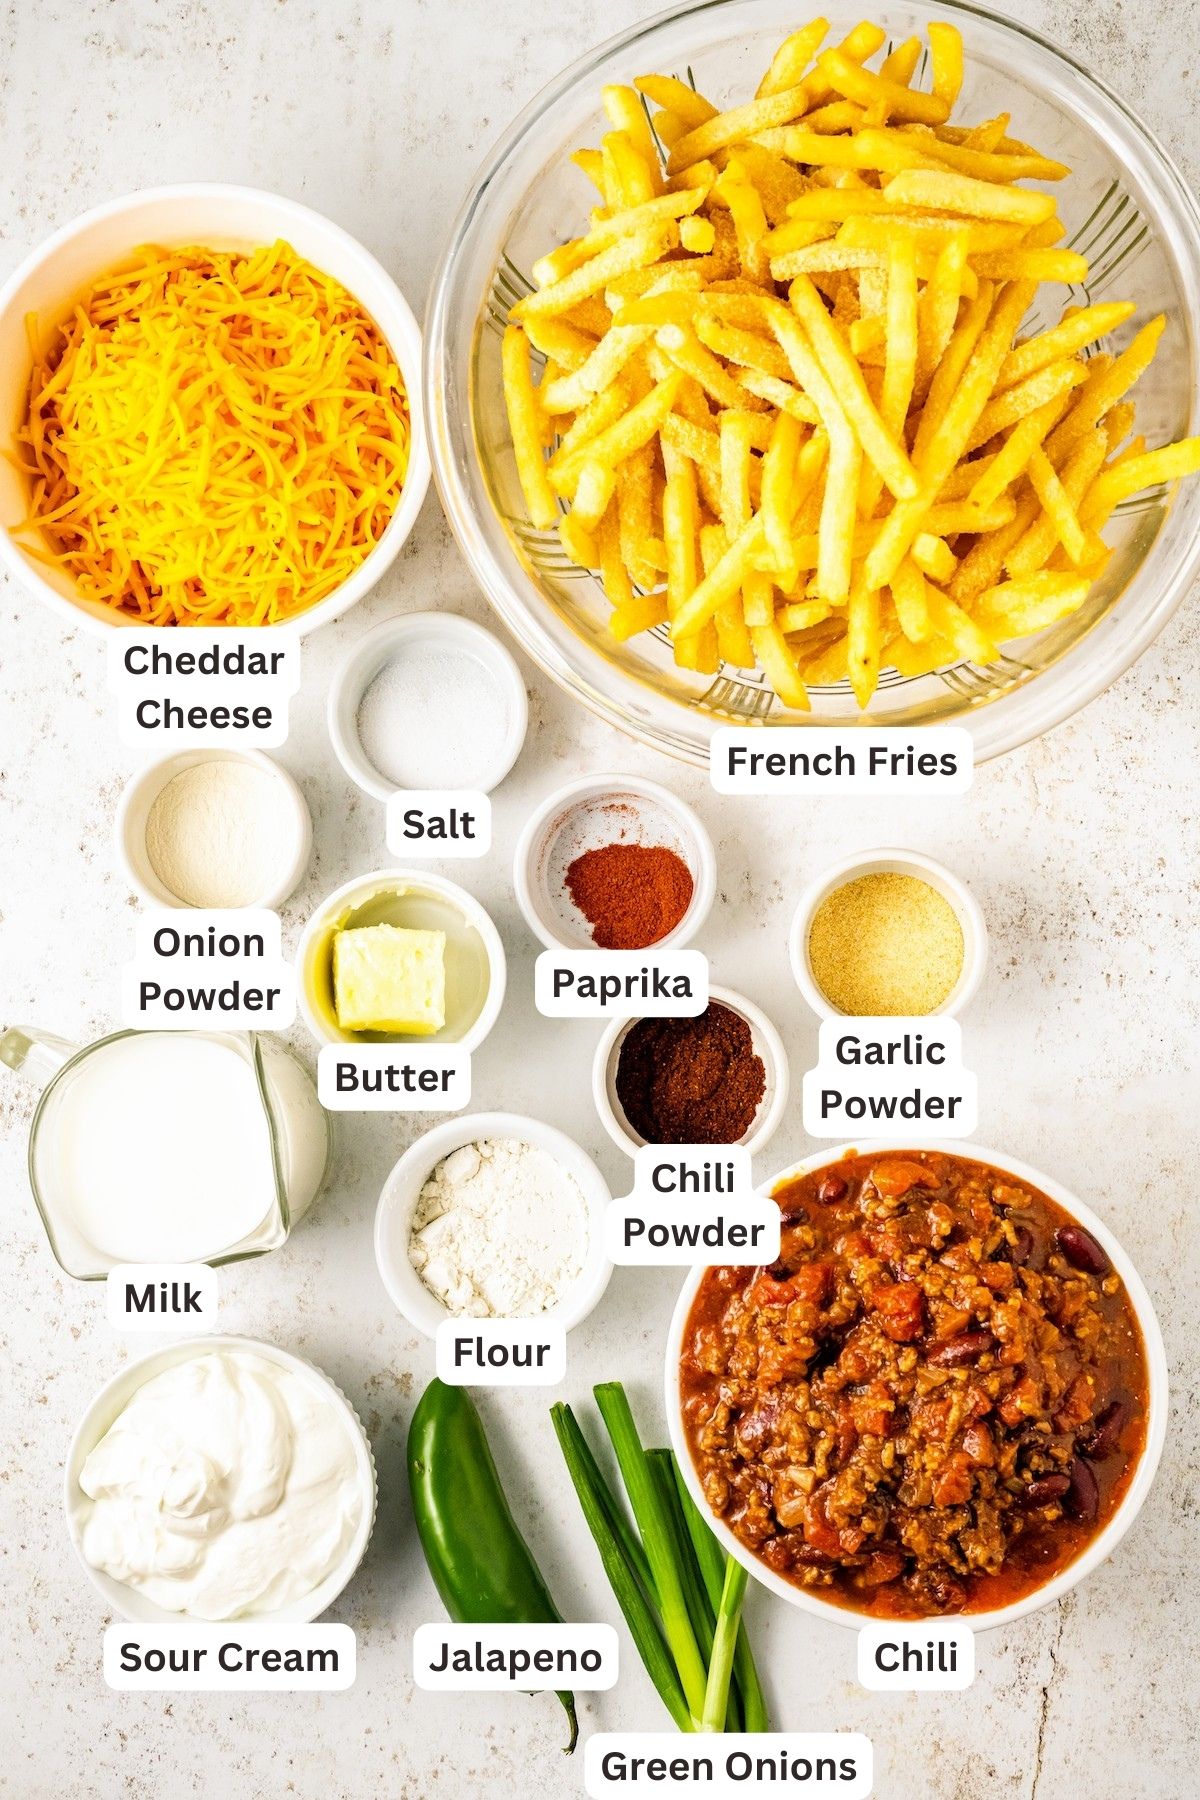 Ingredients for Chili Cheese Fries recipe.